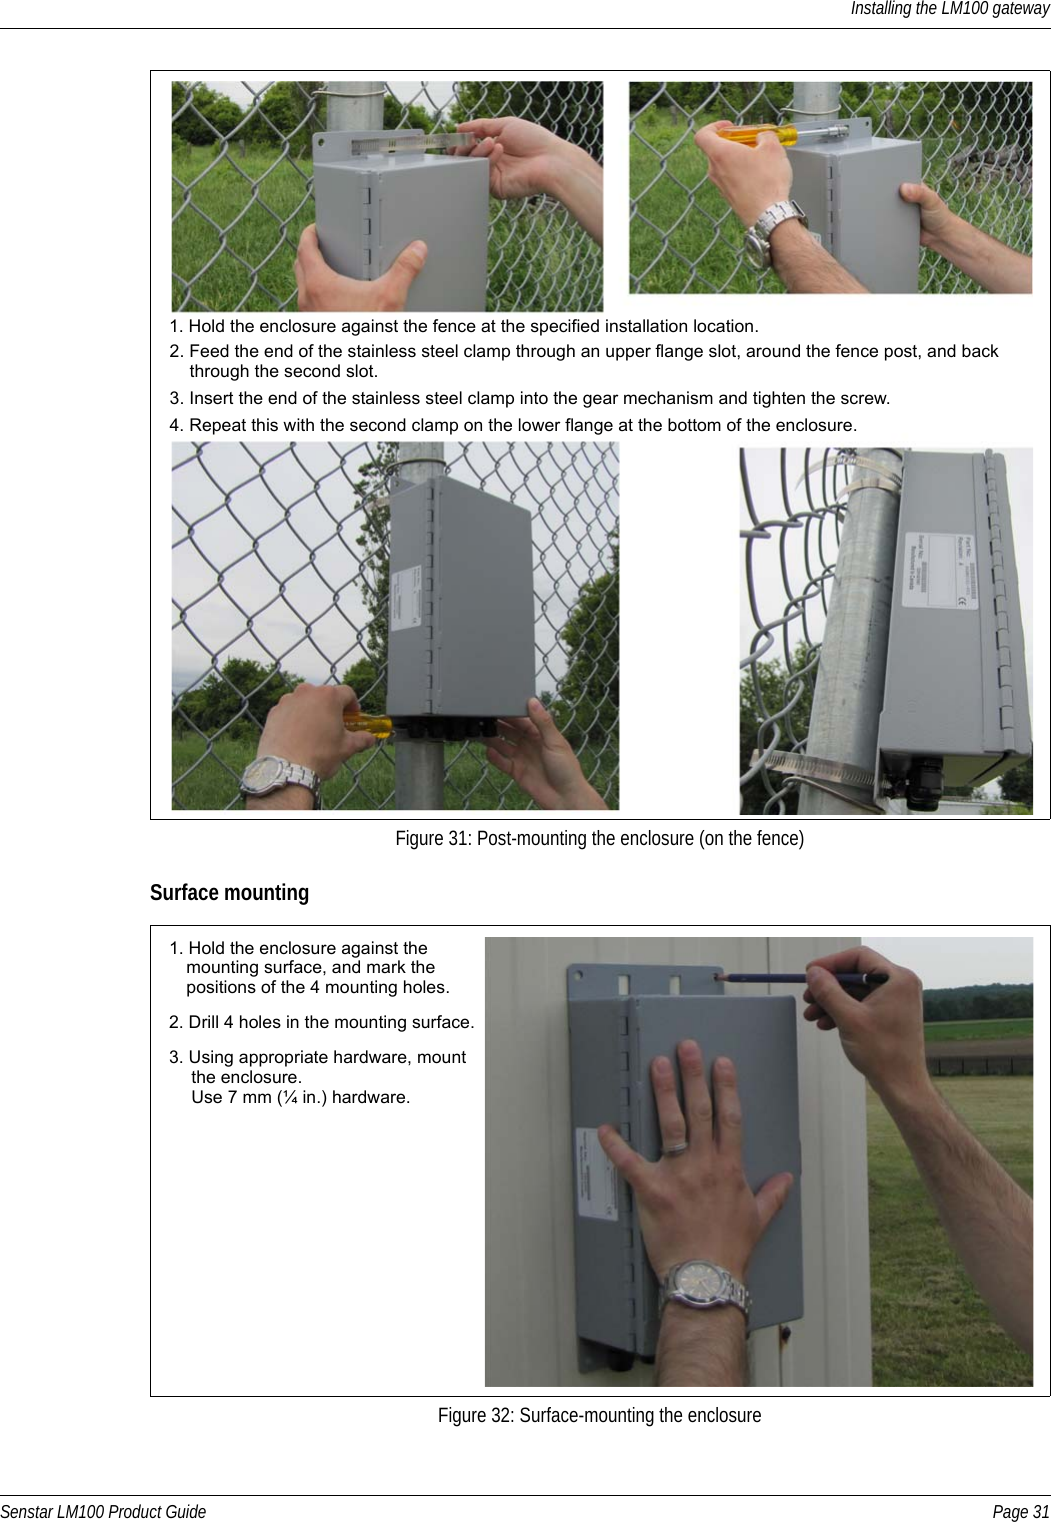 Installing the LM100 gatewaySenstar LM100 Product Guide Page 31Surface mountingFigure 31: Post-mounting the enclosure (on the fence)Figure 32: Surface-mounting the enclosure1. Hold the enclosure against the fence at the specified installation location.2. Feed the end of the stainless steel clamp through an upper flange slot, around the fence post, and back     through the second slot.3. Insert the end of the stainless steel clamp into the gear mechanism and tighten the screw.4. Repeat this with the second clamp on the lower flange at the bottom of the enclosure. 1. Hold the enclosure against the 2. Drill 4 holes in the mounting surface.3. Using appropriate hardware, mount    mounting surface, and mark the    positions of the 4 mounting holes.    the enclosure.     Use 7 mm (¼ in.) hardware.